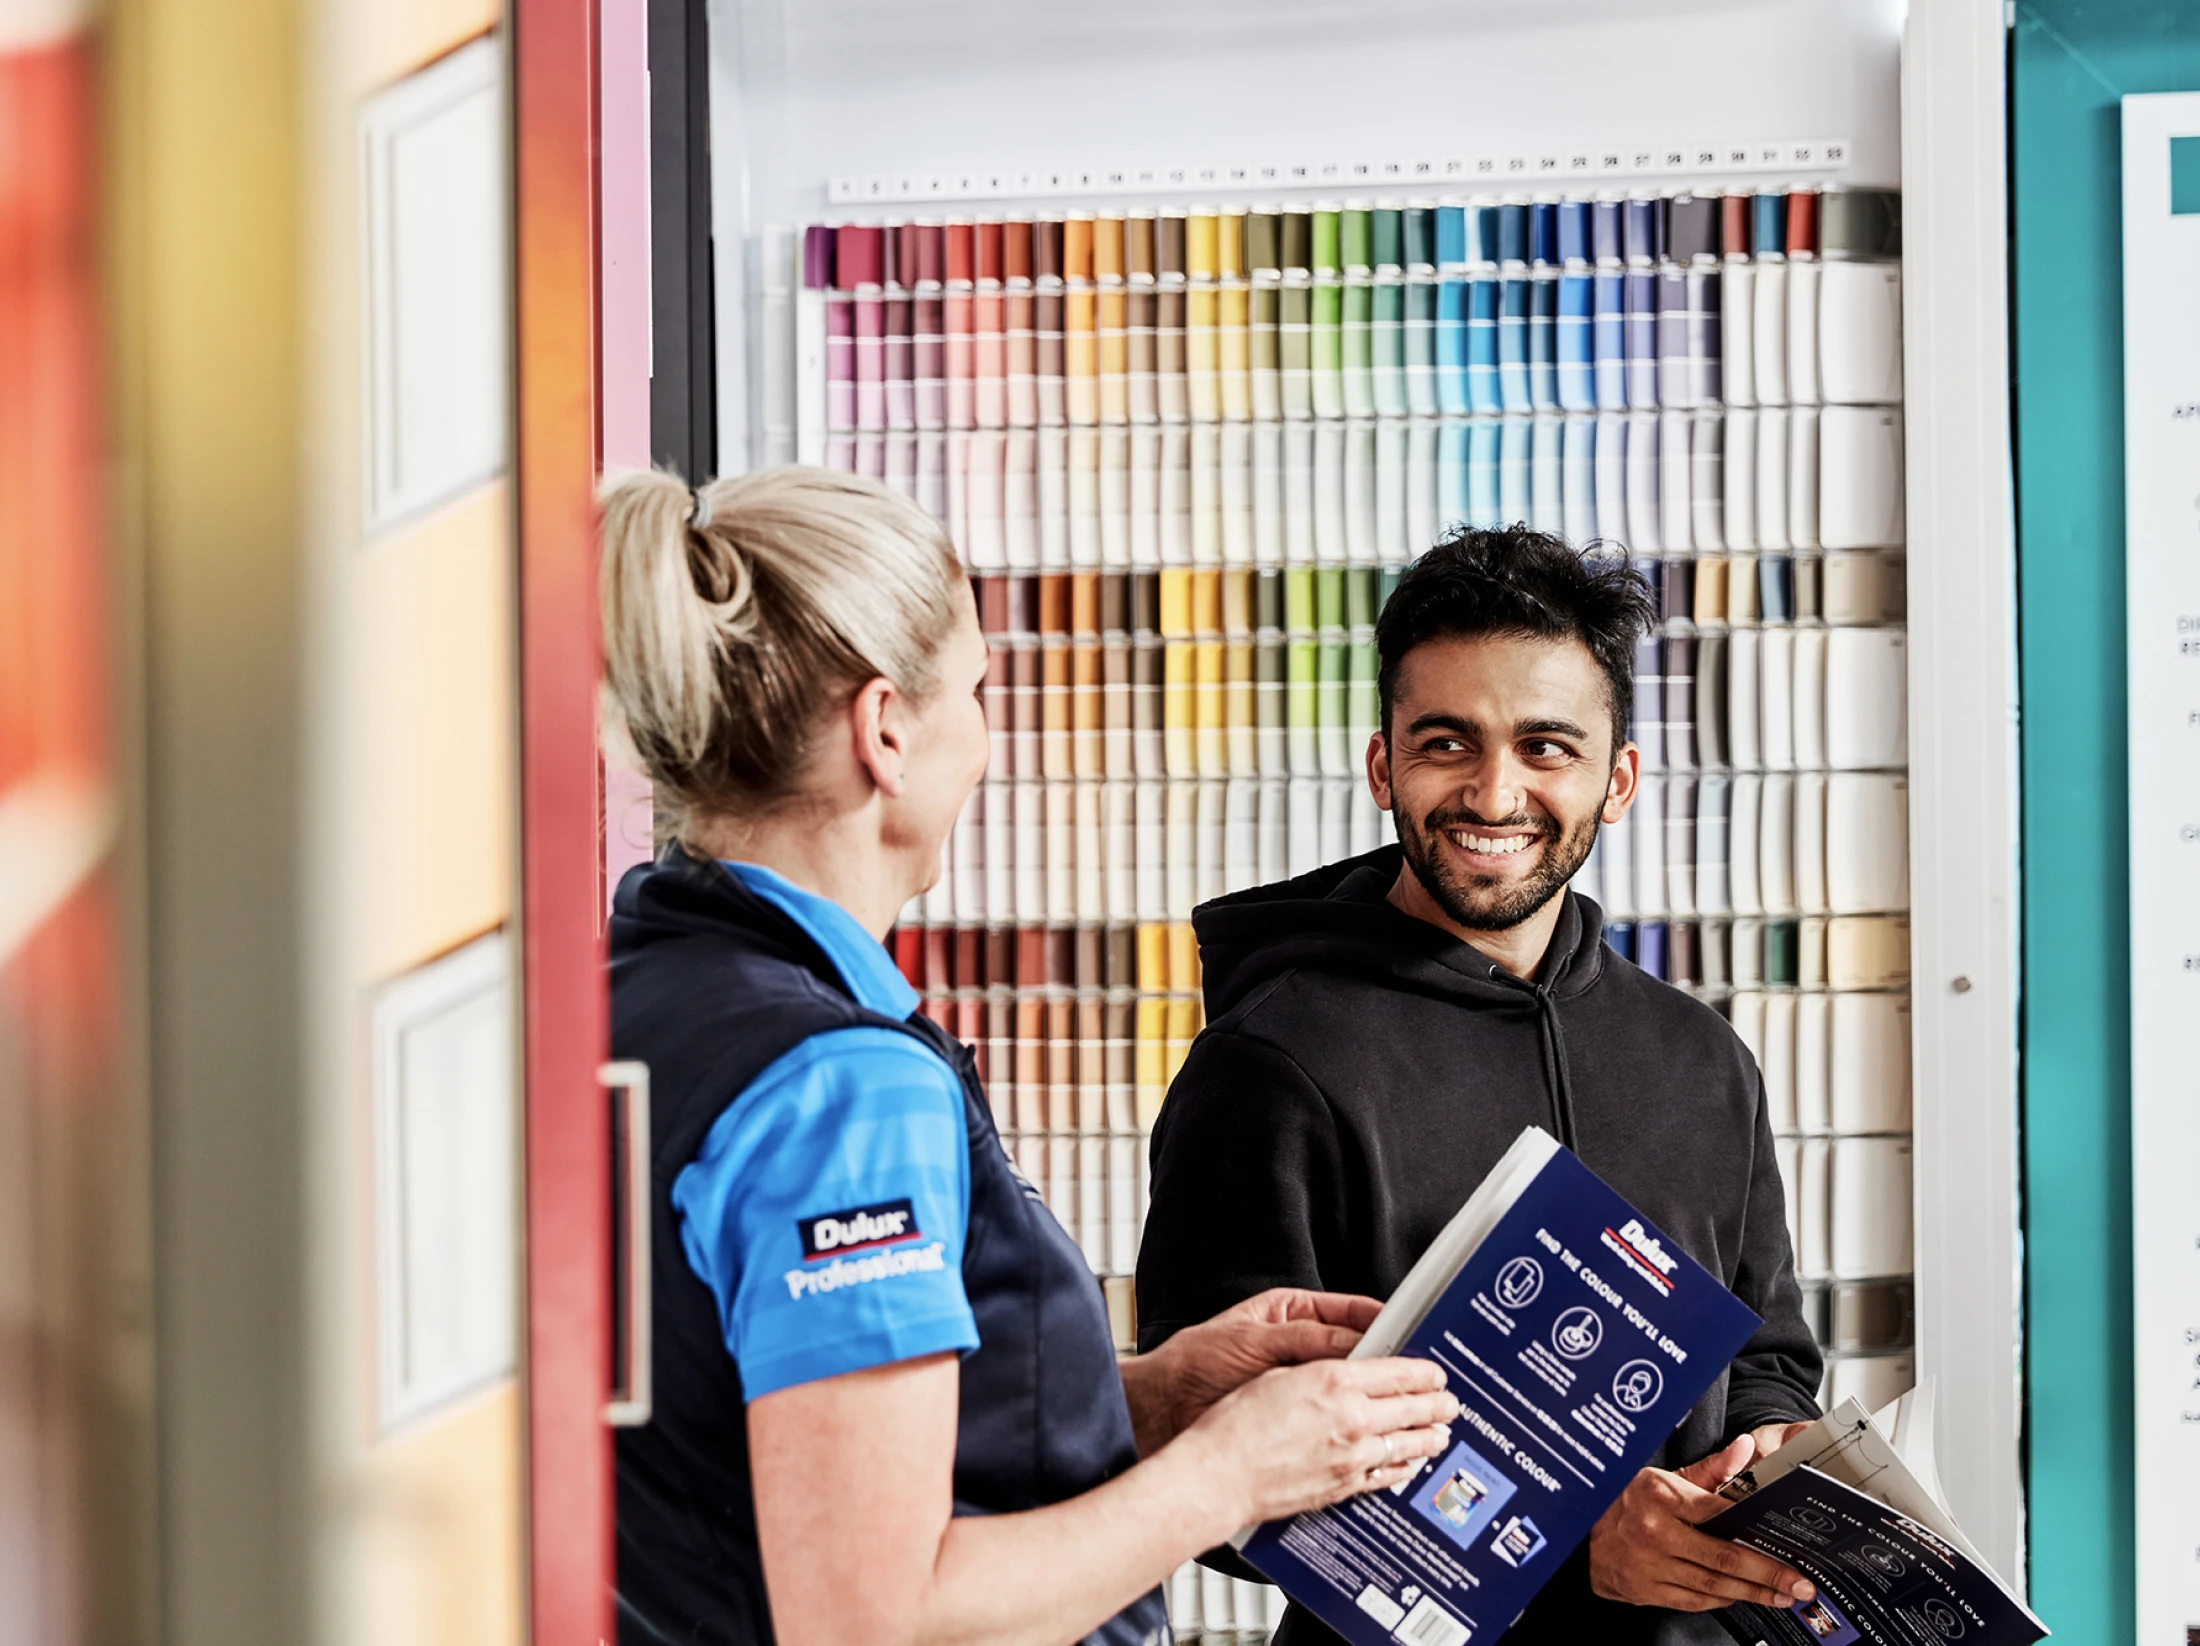 Dulux store staff talking to a painter in front of the colour chip wall